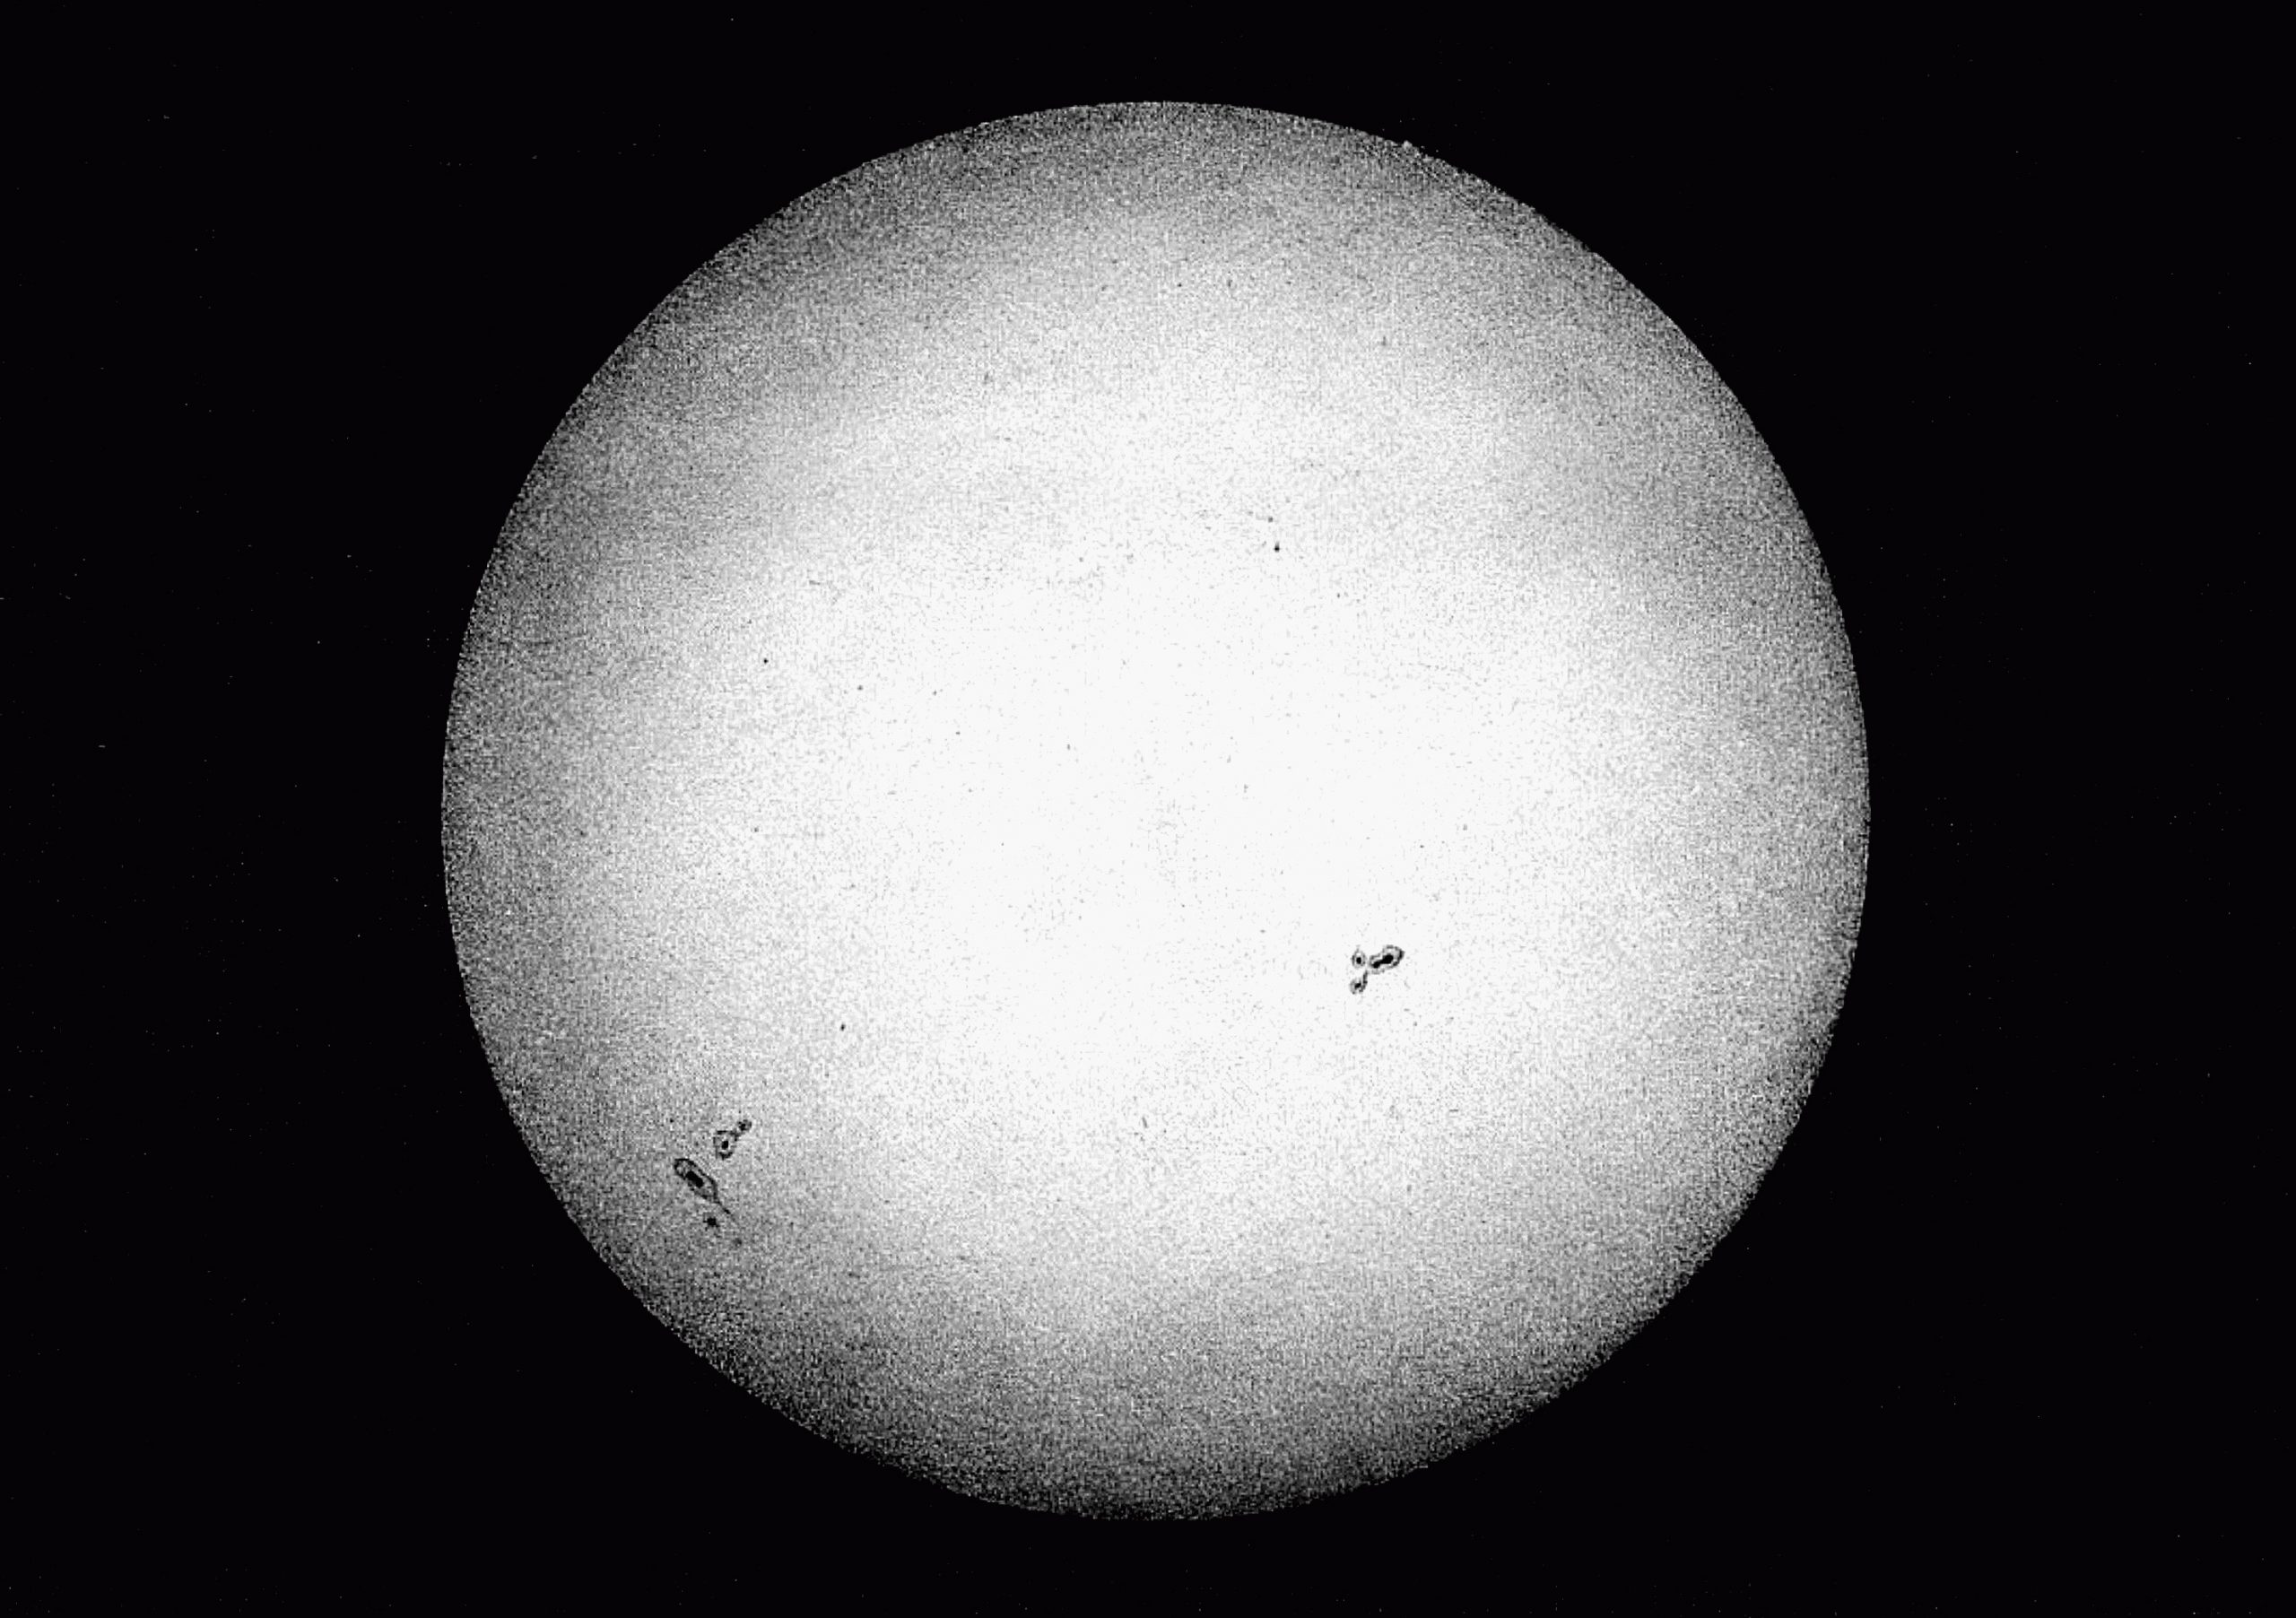 The oldest surviving photograph of the sun (and the first to show sunspots), taken by hippolyte fizeau and léon foucault on 2 april 1845.